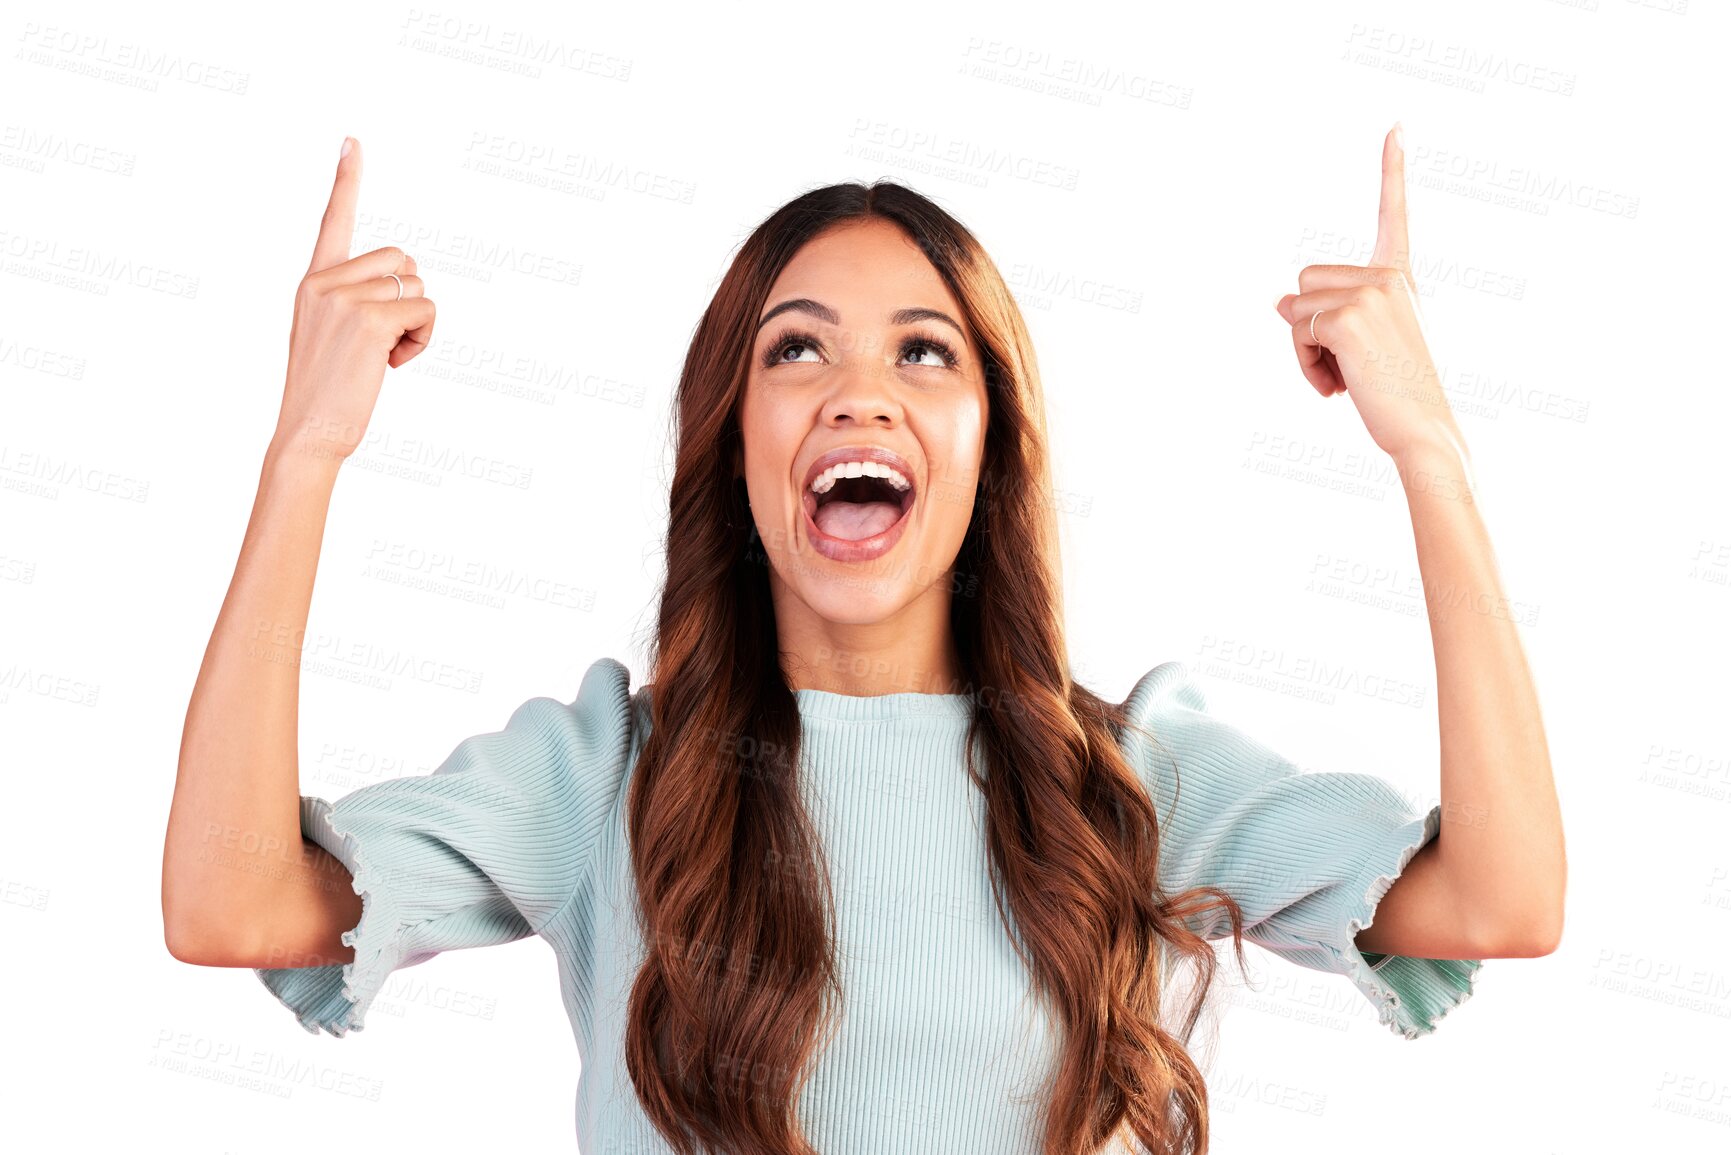 Buy stock photo Excited, pointing up or happy woman for a sale, deal or discount isolated on transparent png background. Advertising, smile or person showing product placement, promotion offer or retail announcement